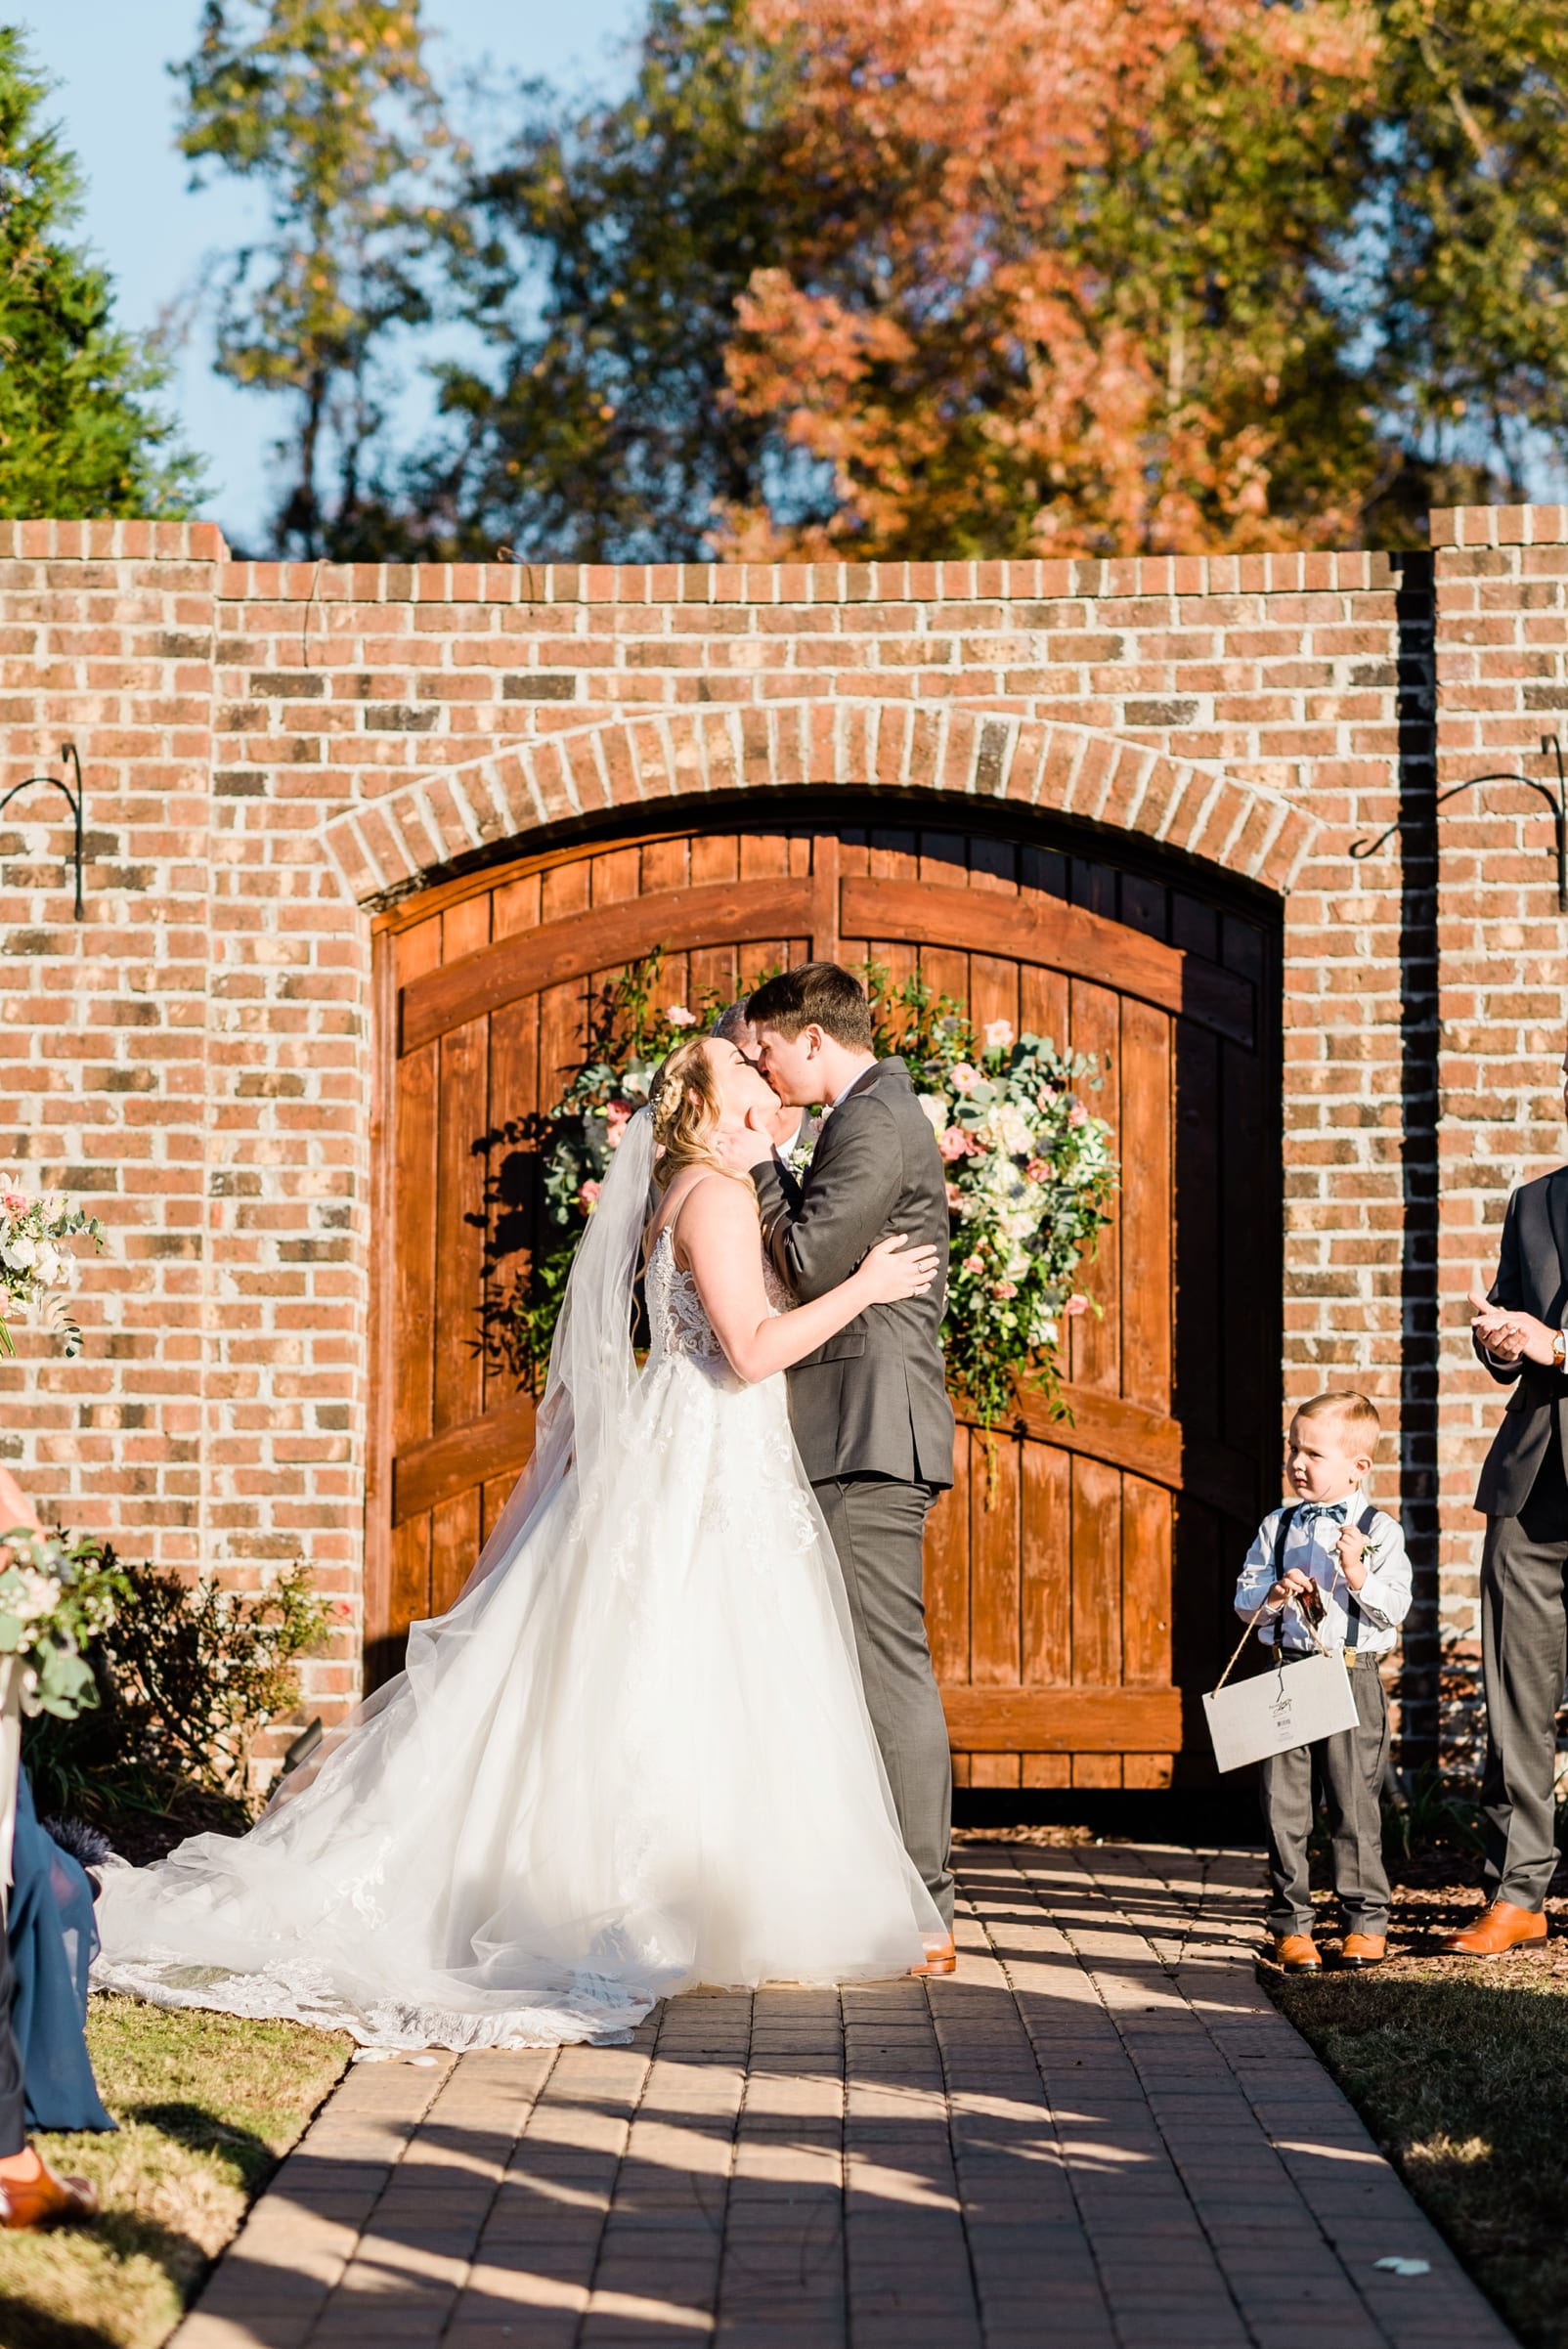 Oaks at Salem bride and groom first kiss after getting married photo